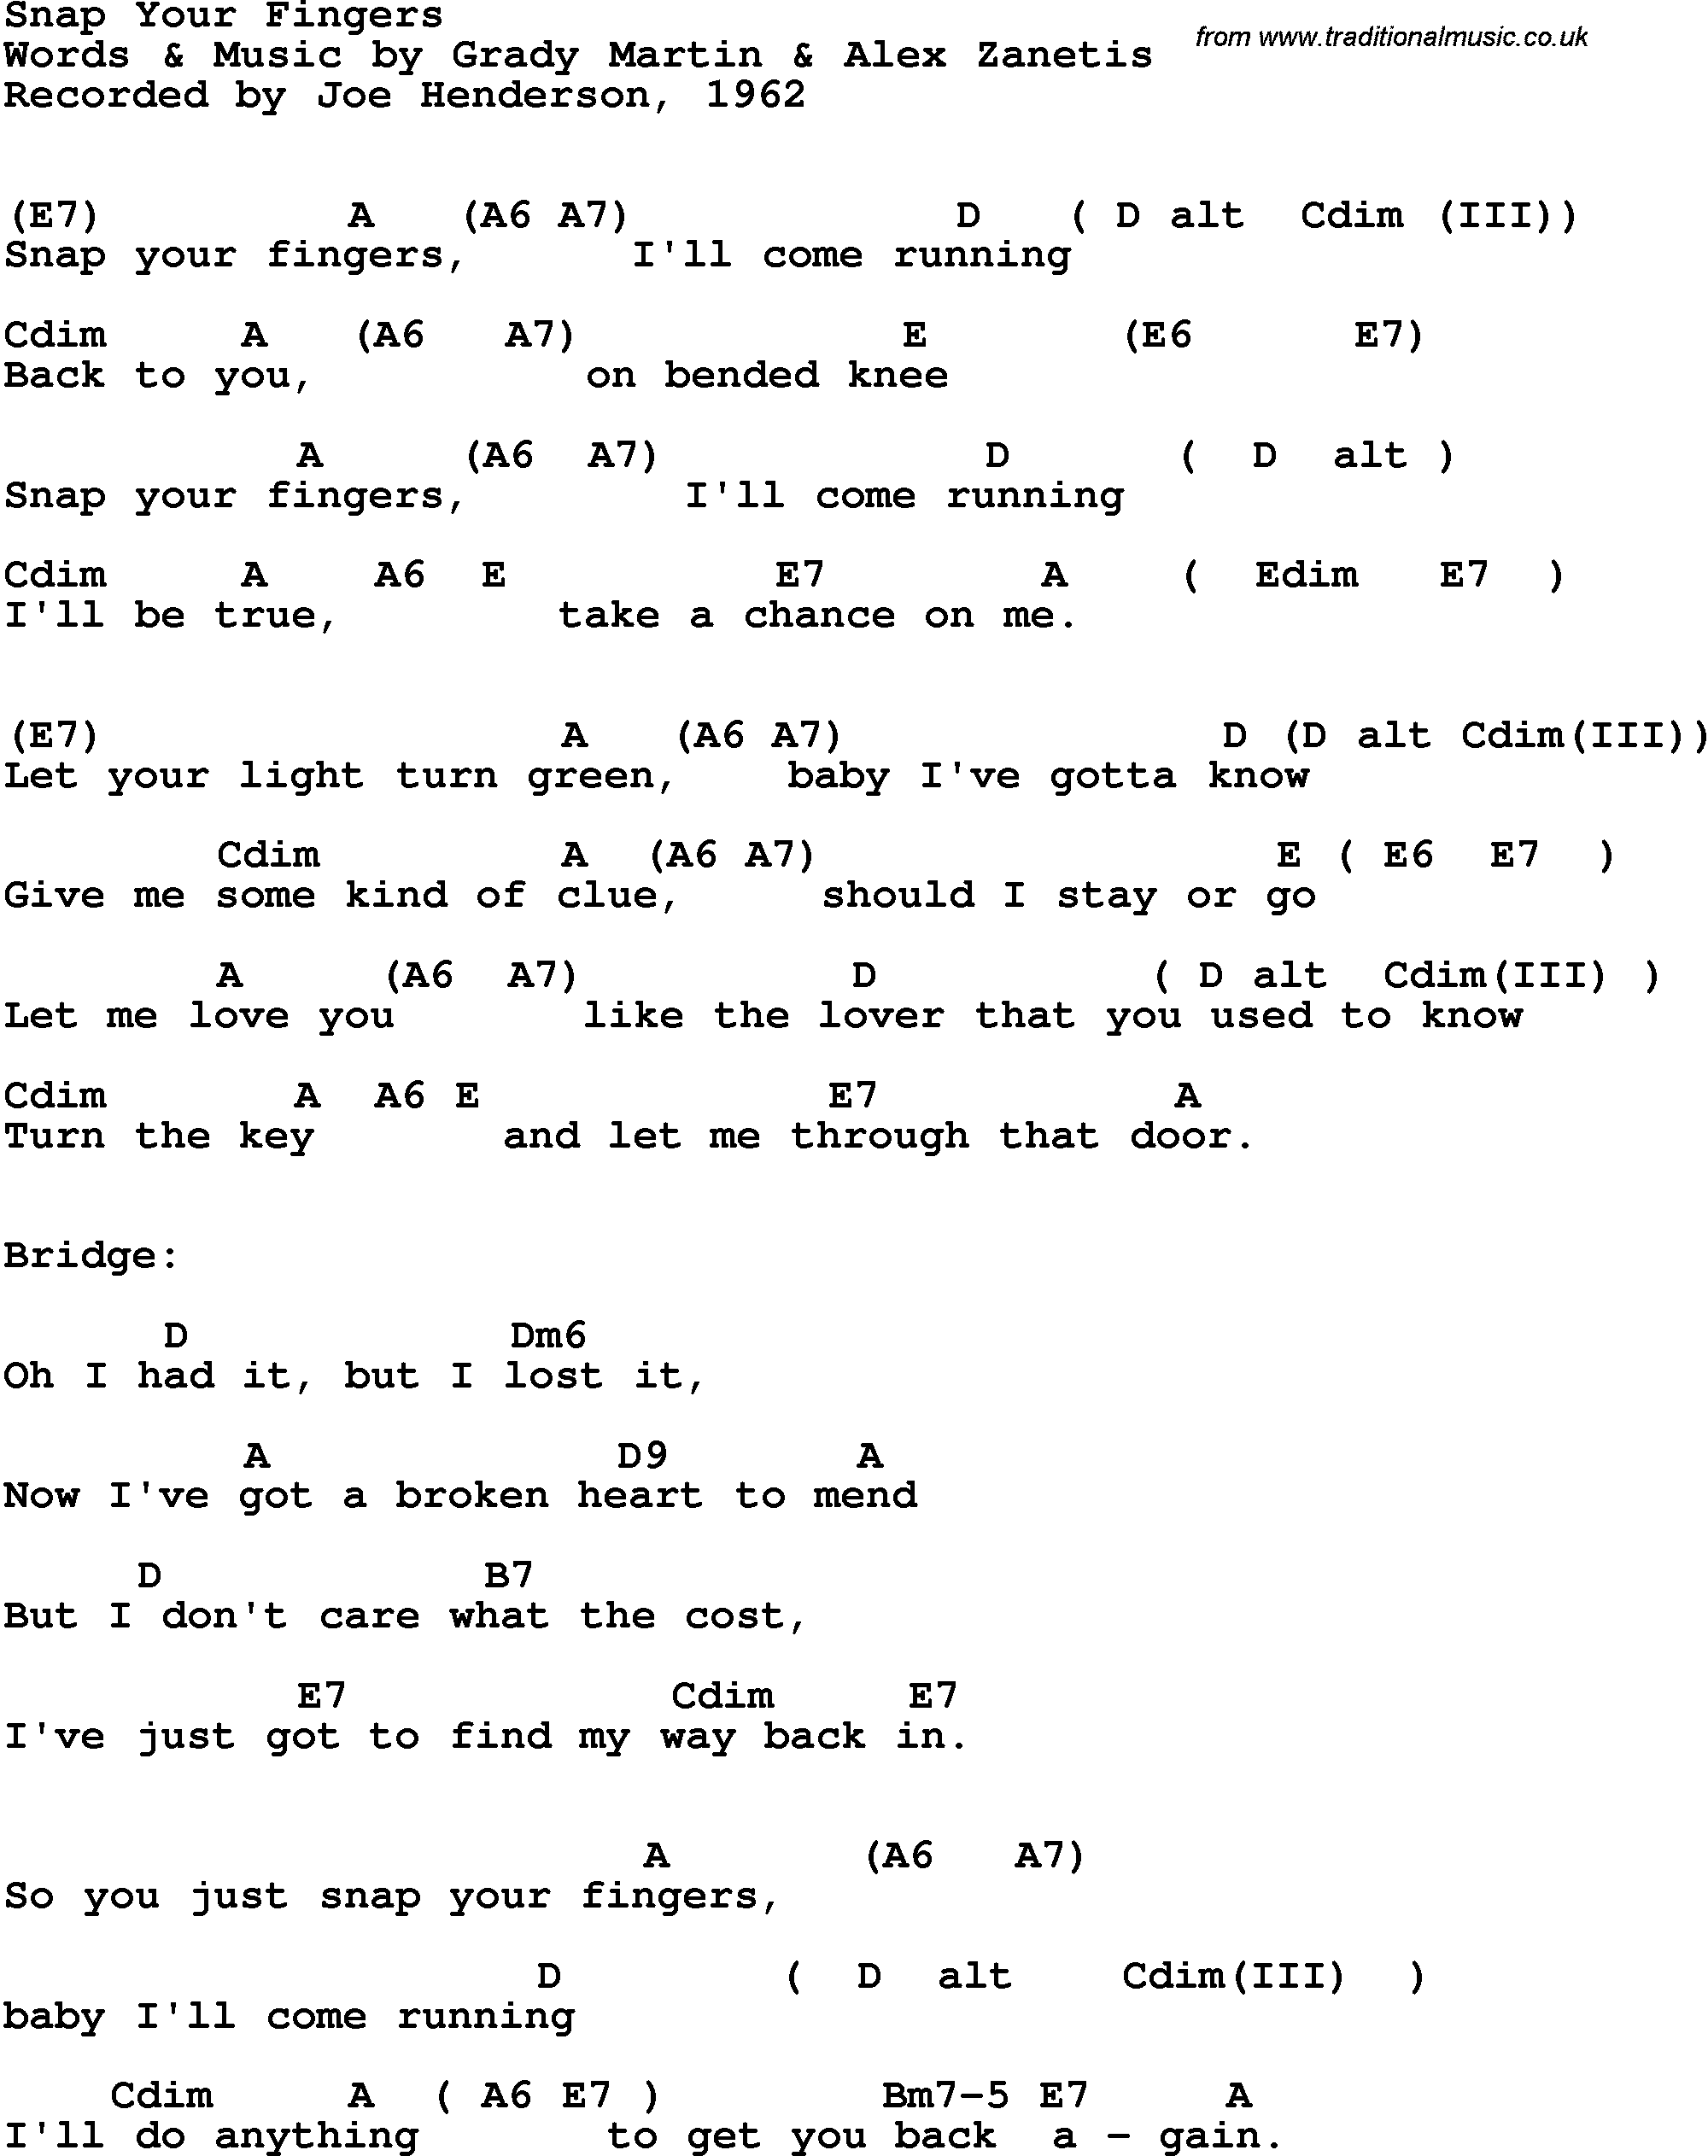 Song Lyrics with guitar chords for Snap Your Fingers - Joe Henderson, 1962